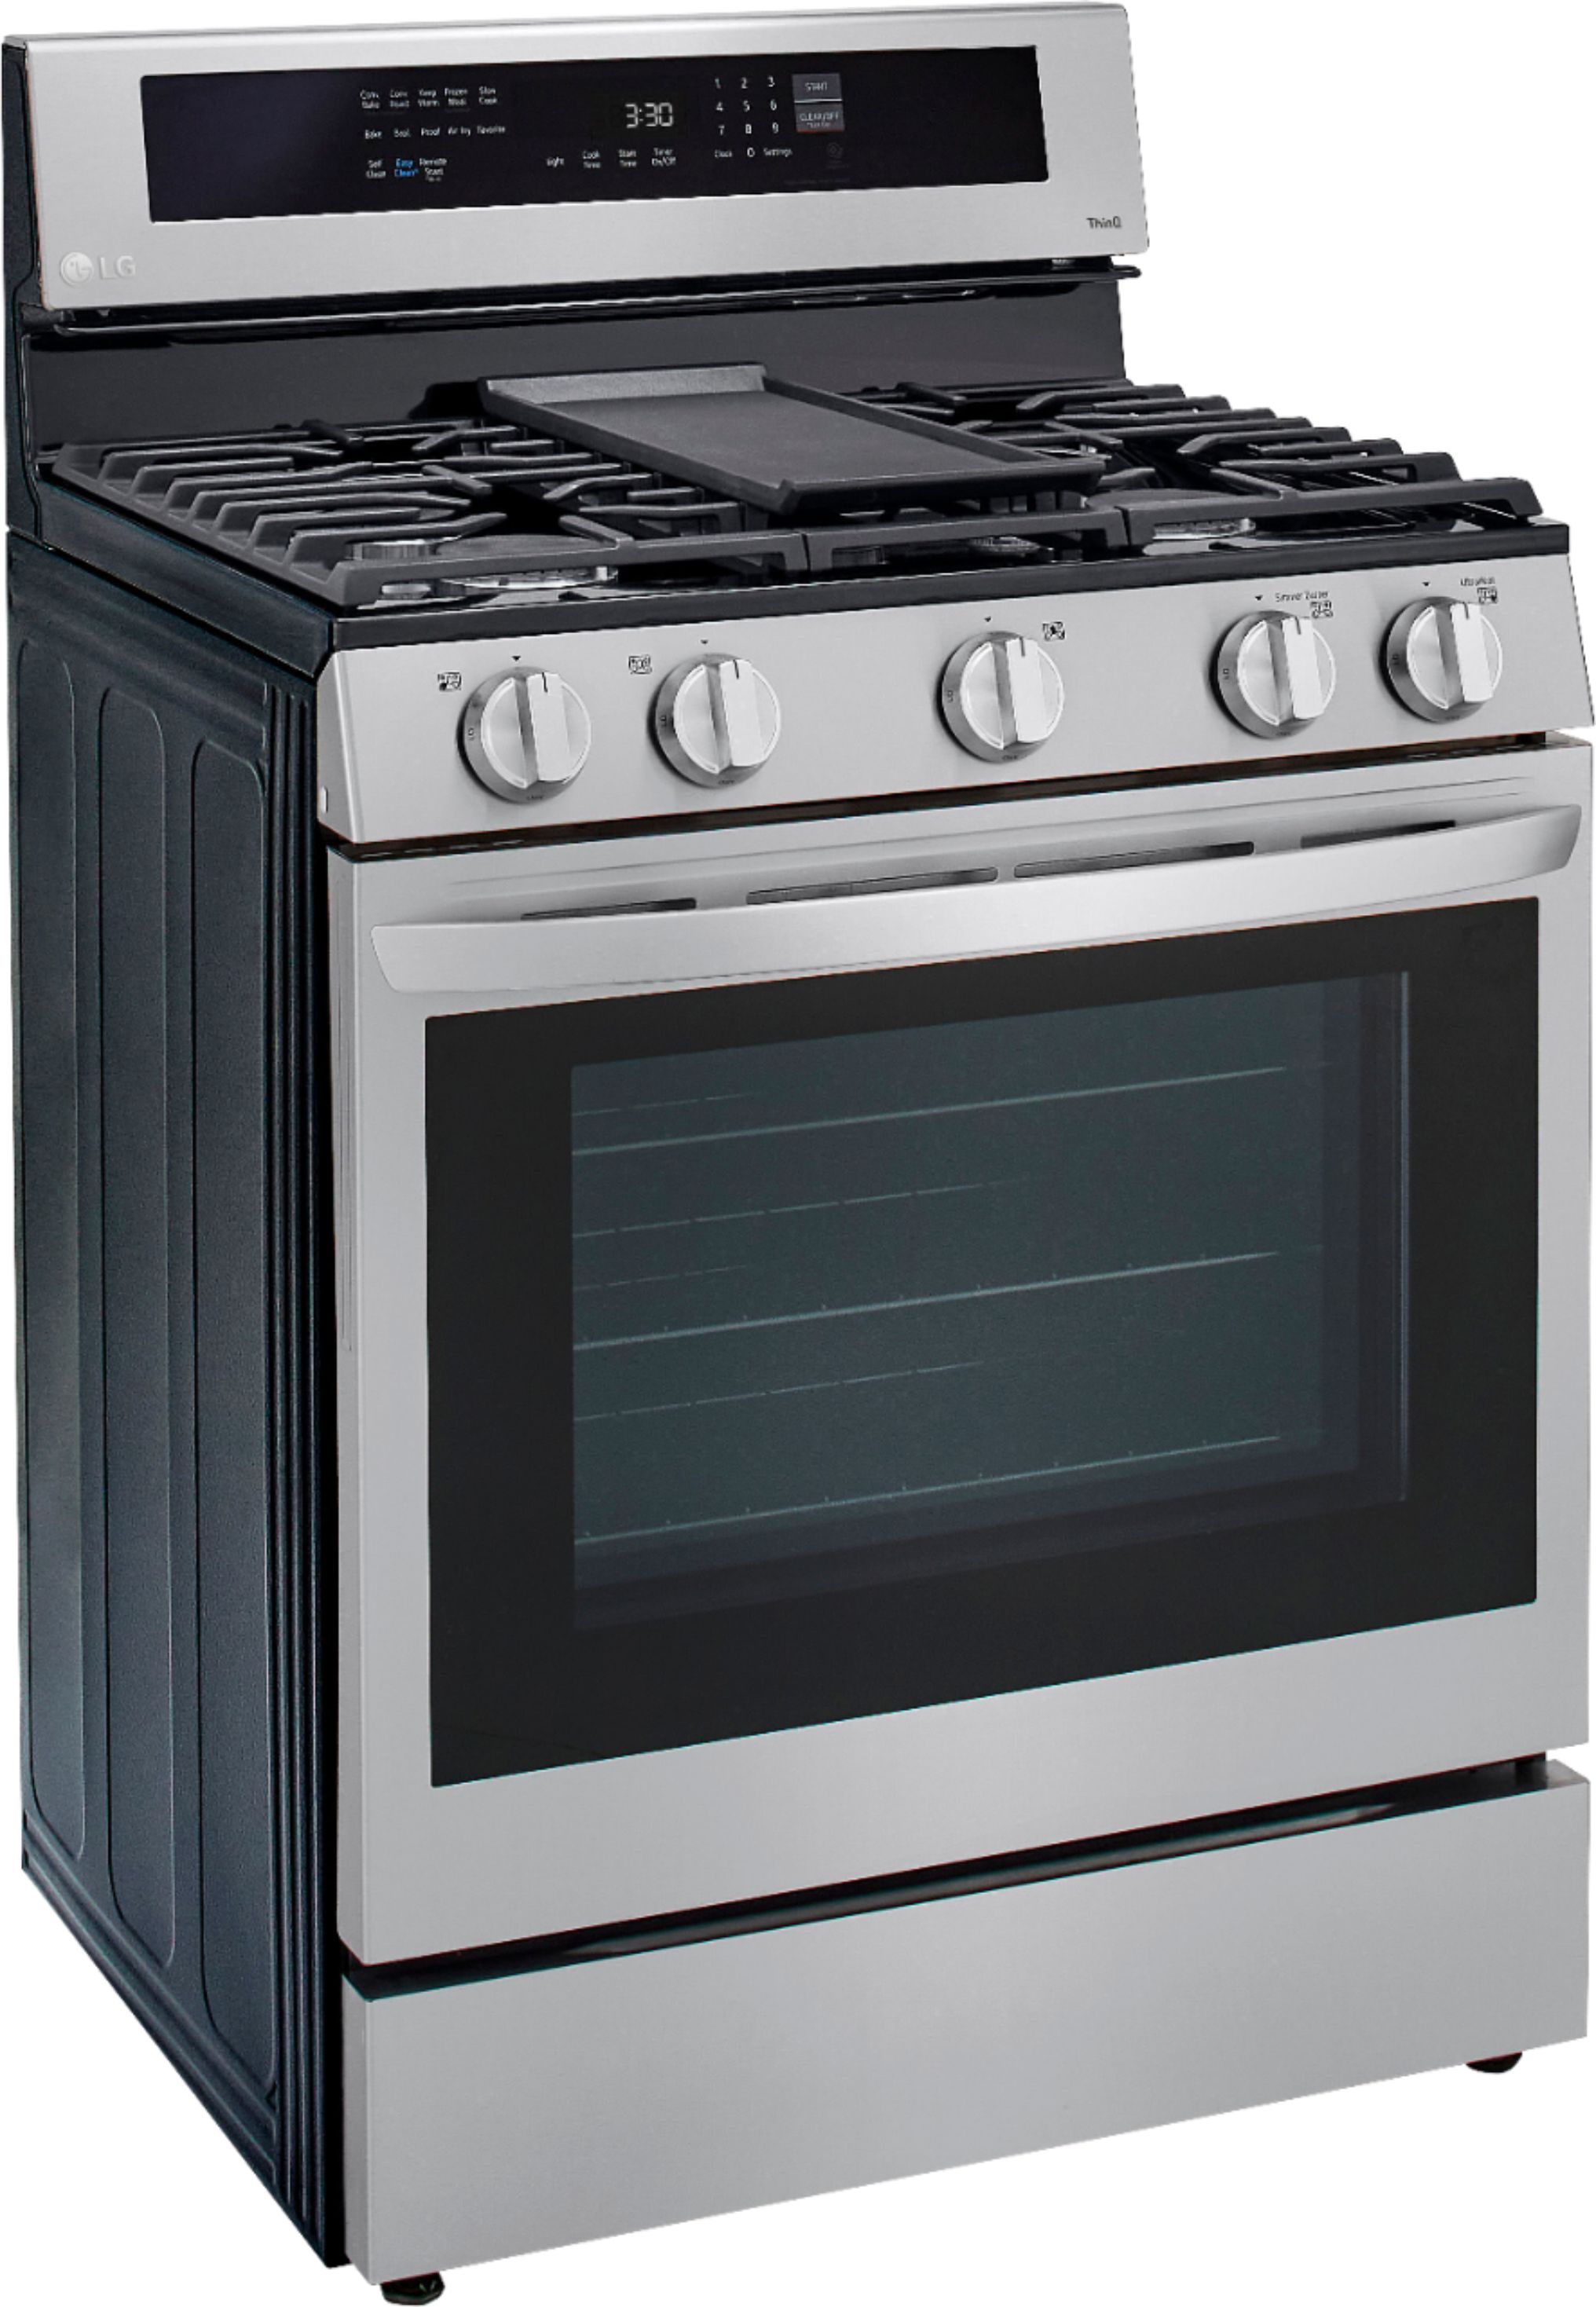 Left View: LG - 5.8 Cu. Ft. Freestanding Gas True Convection Range with EasyClean, InstaView and AirFry - Stainless steel